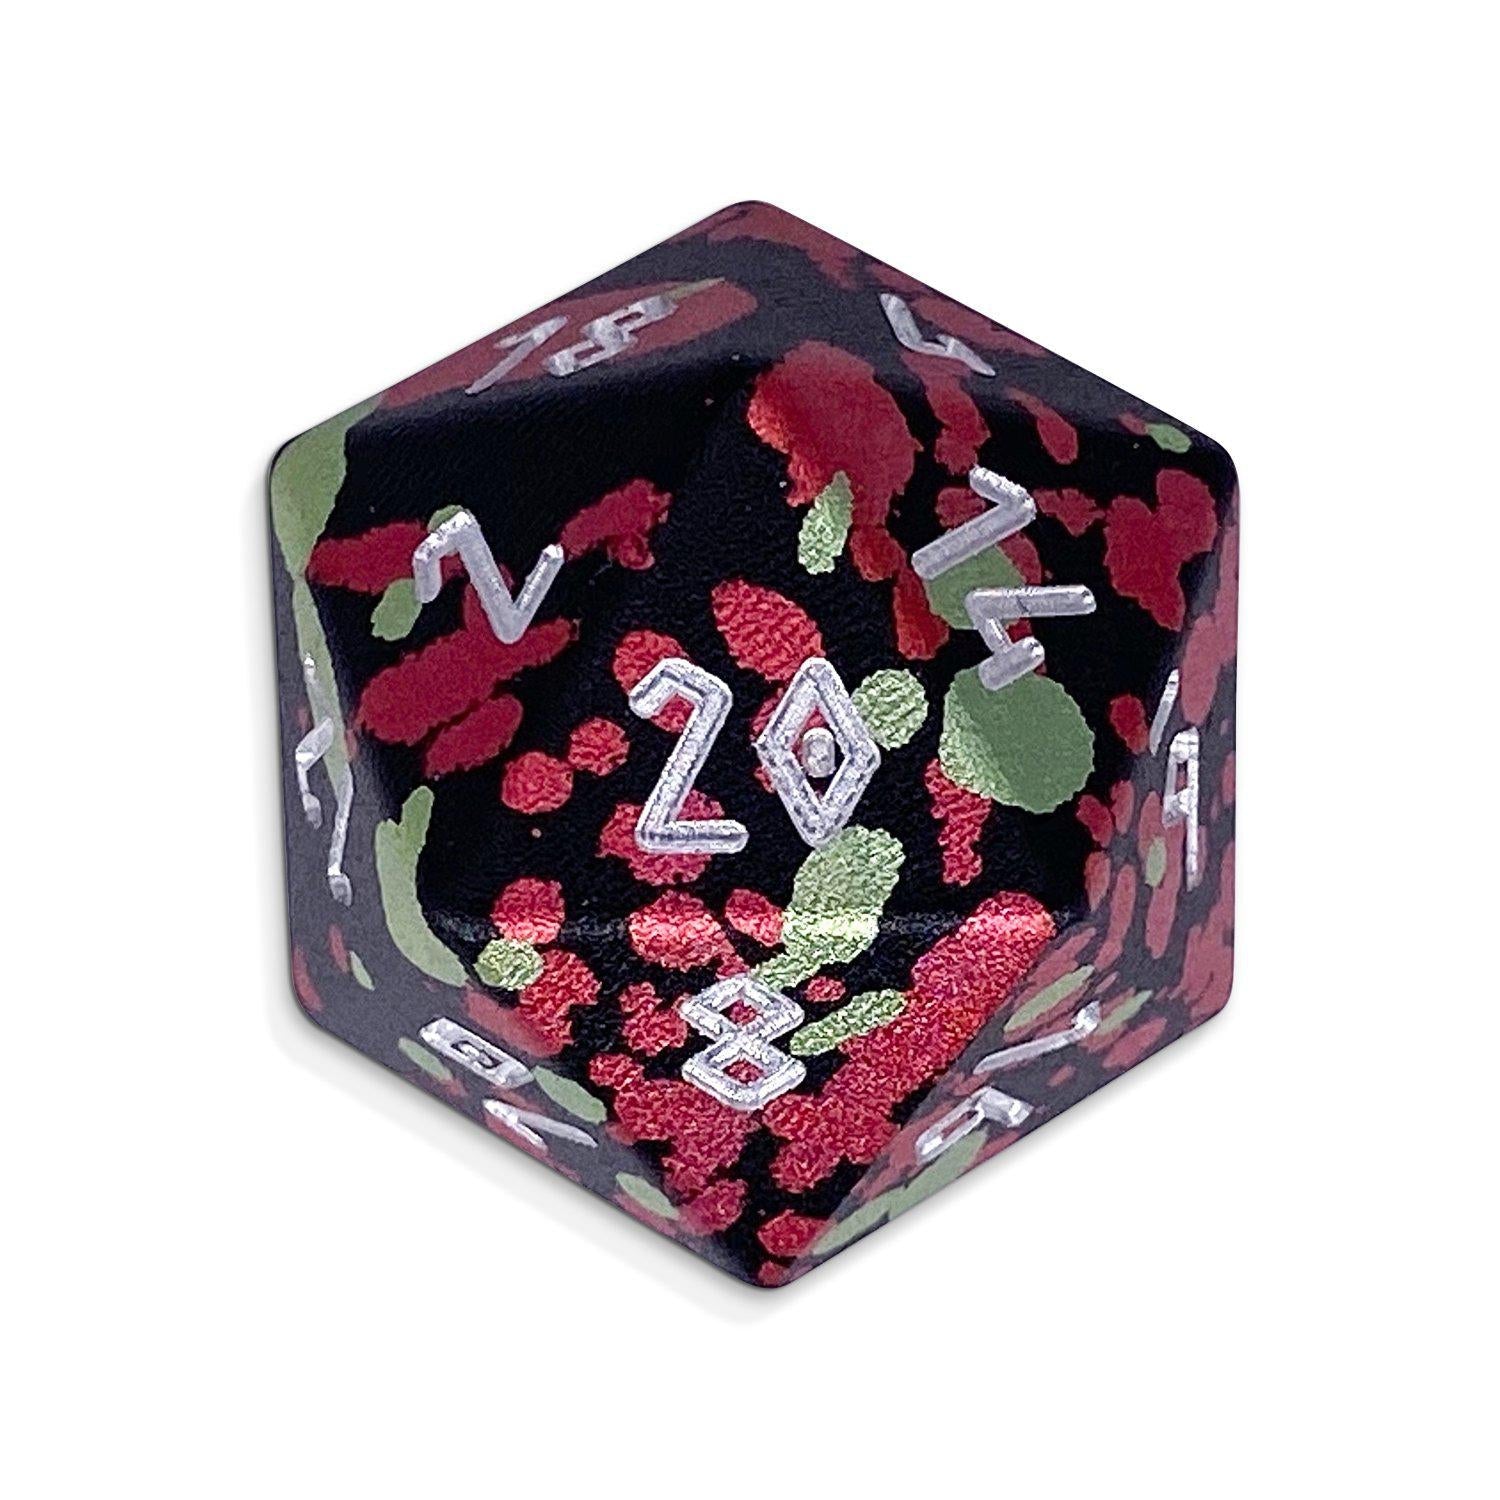 Single Wondrous Dice® D20 in Astral Plane by Norse Foundry - NOR 02390